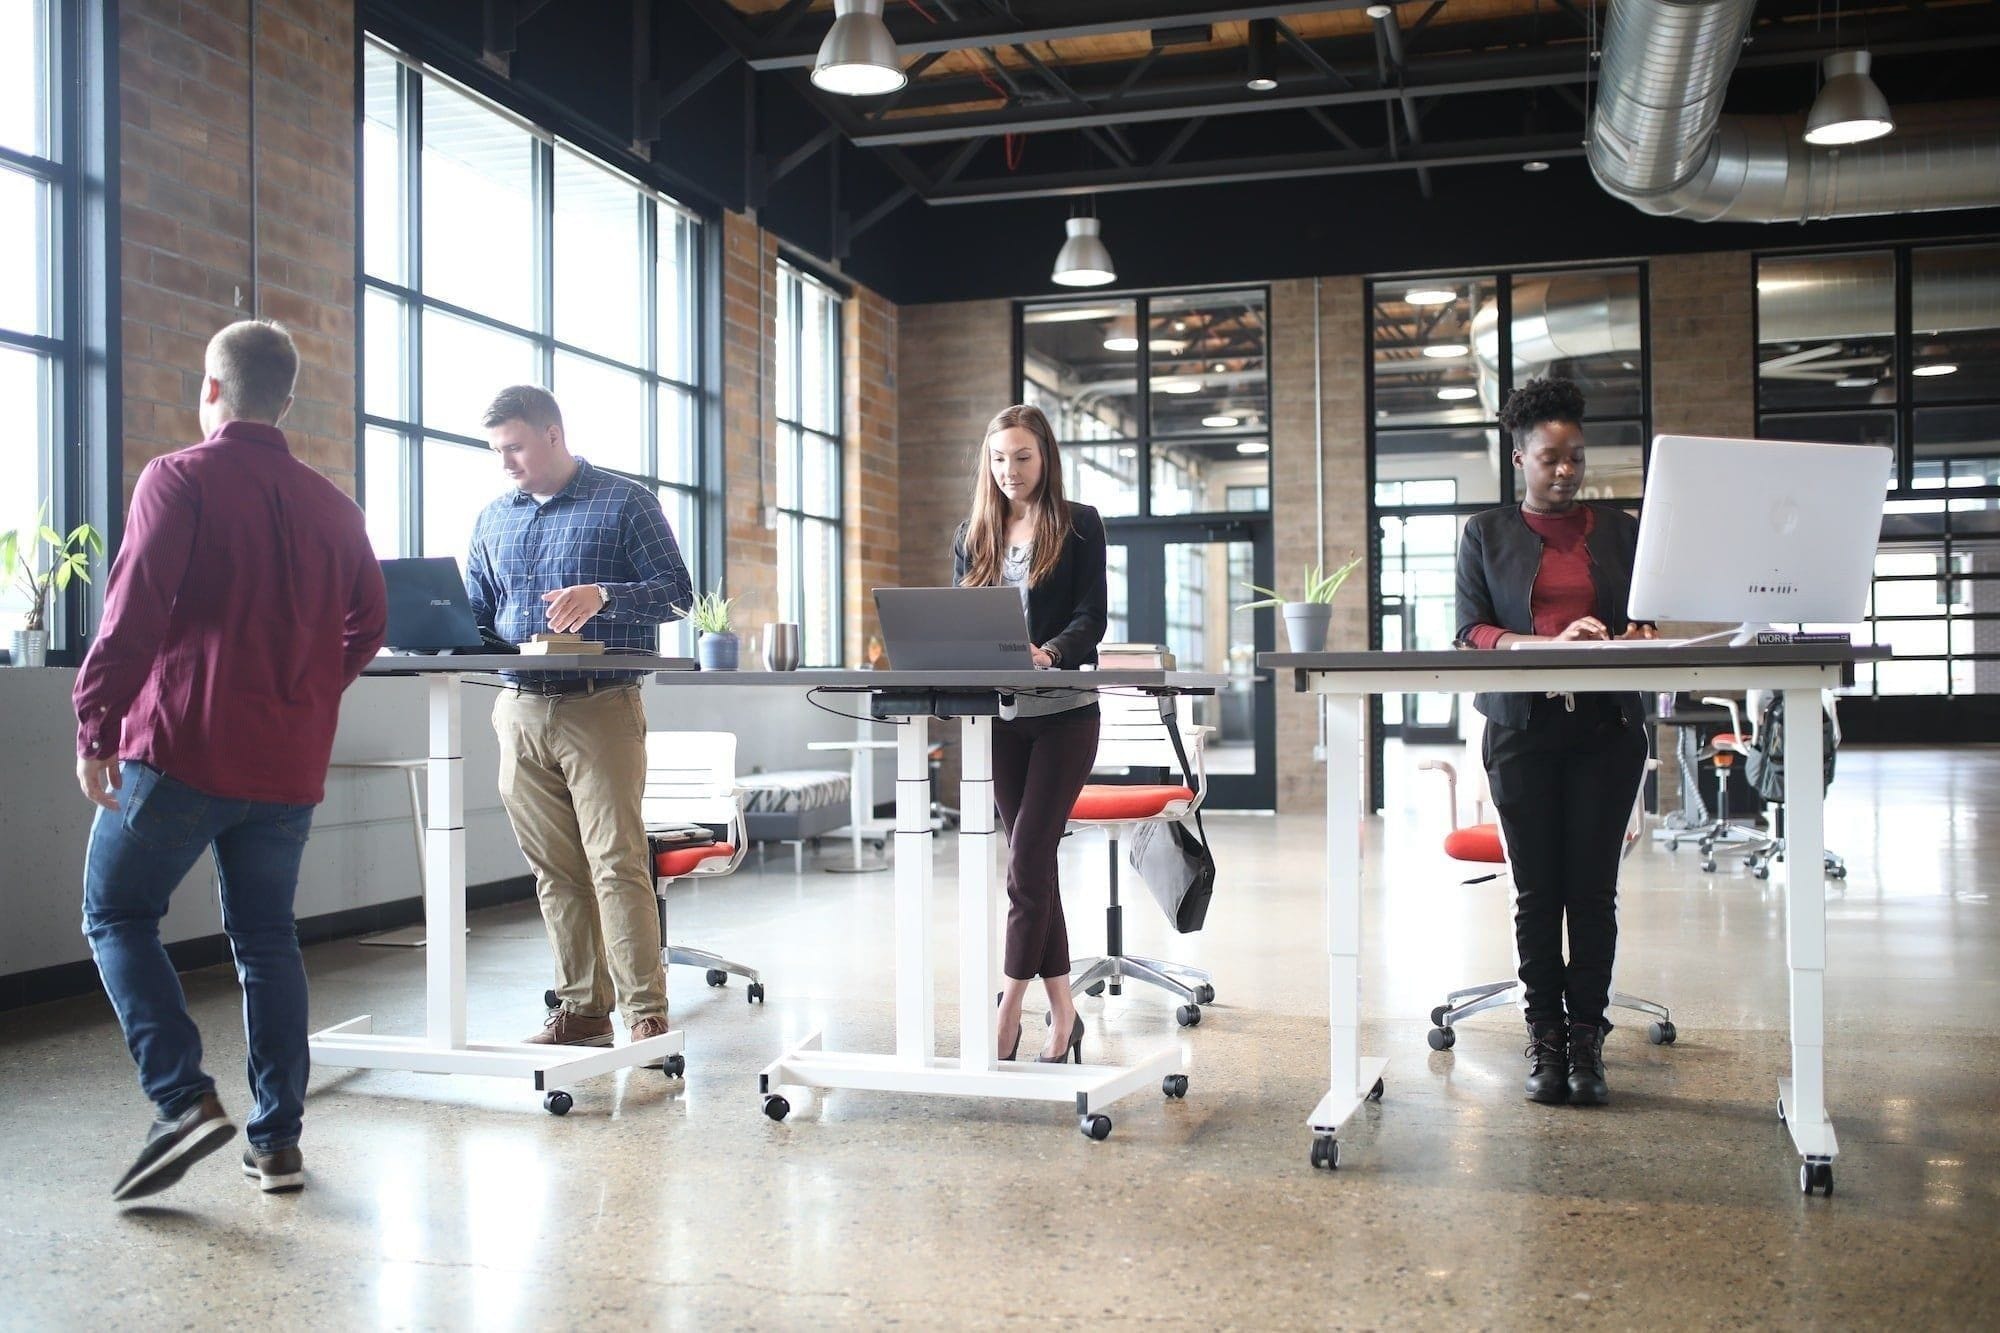 Four people at standing desks working on laptop computers